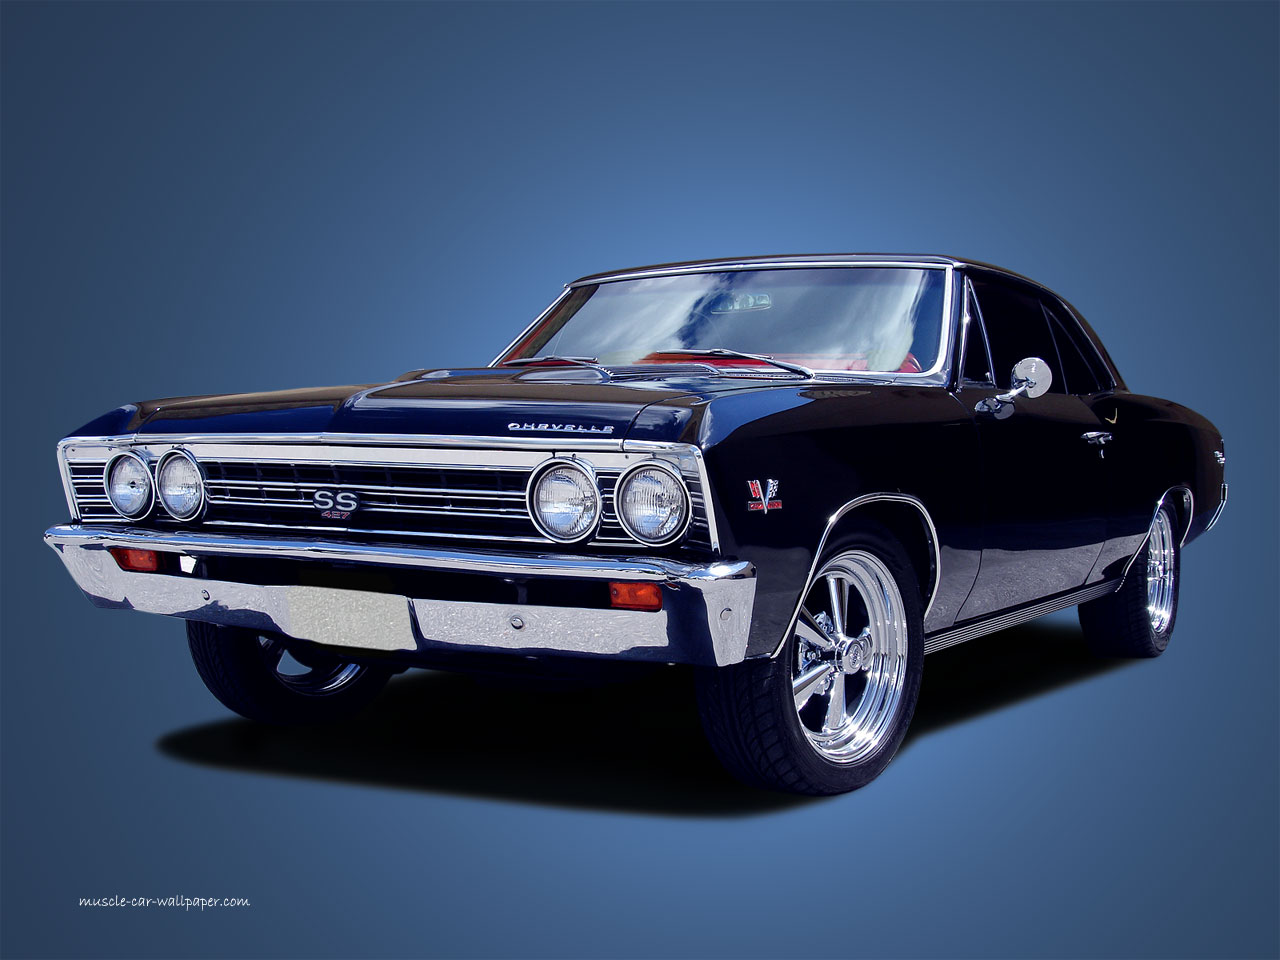 Chevelle SS Wallpaper 1967 Coupe 1280x960 07